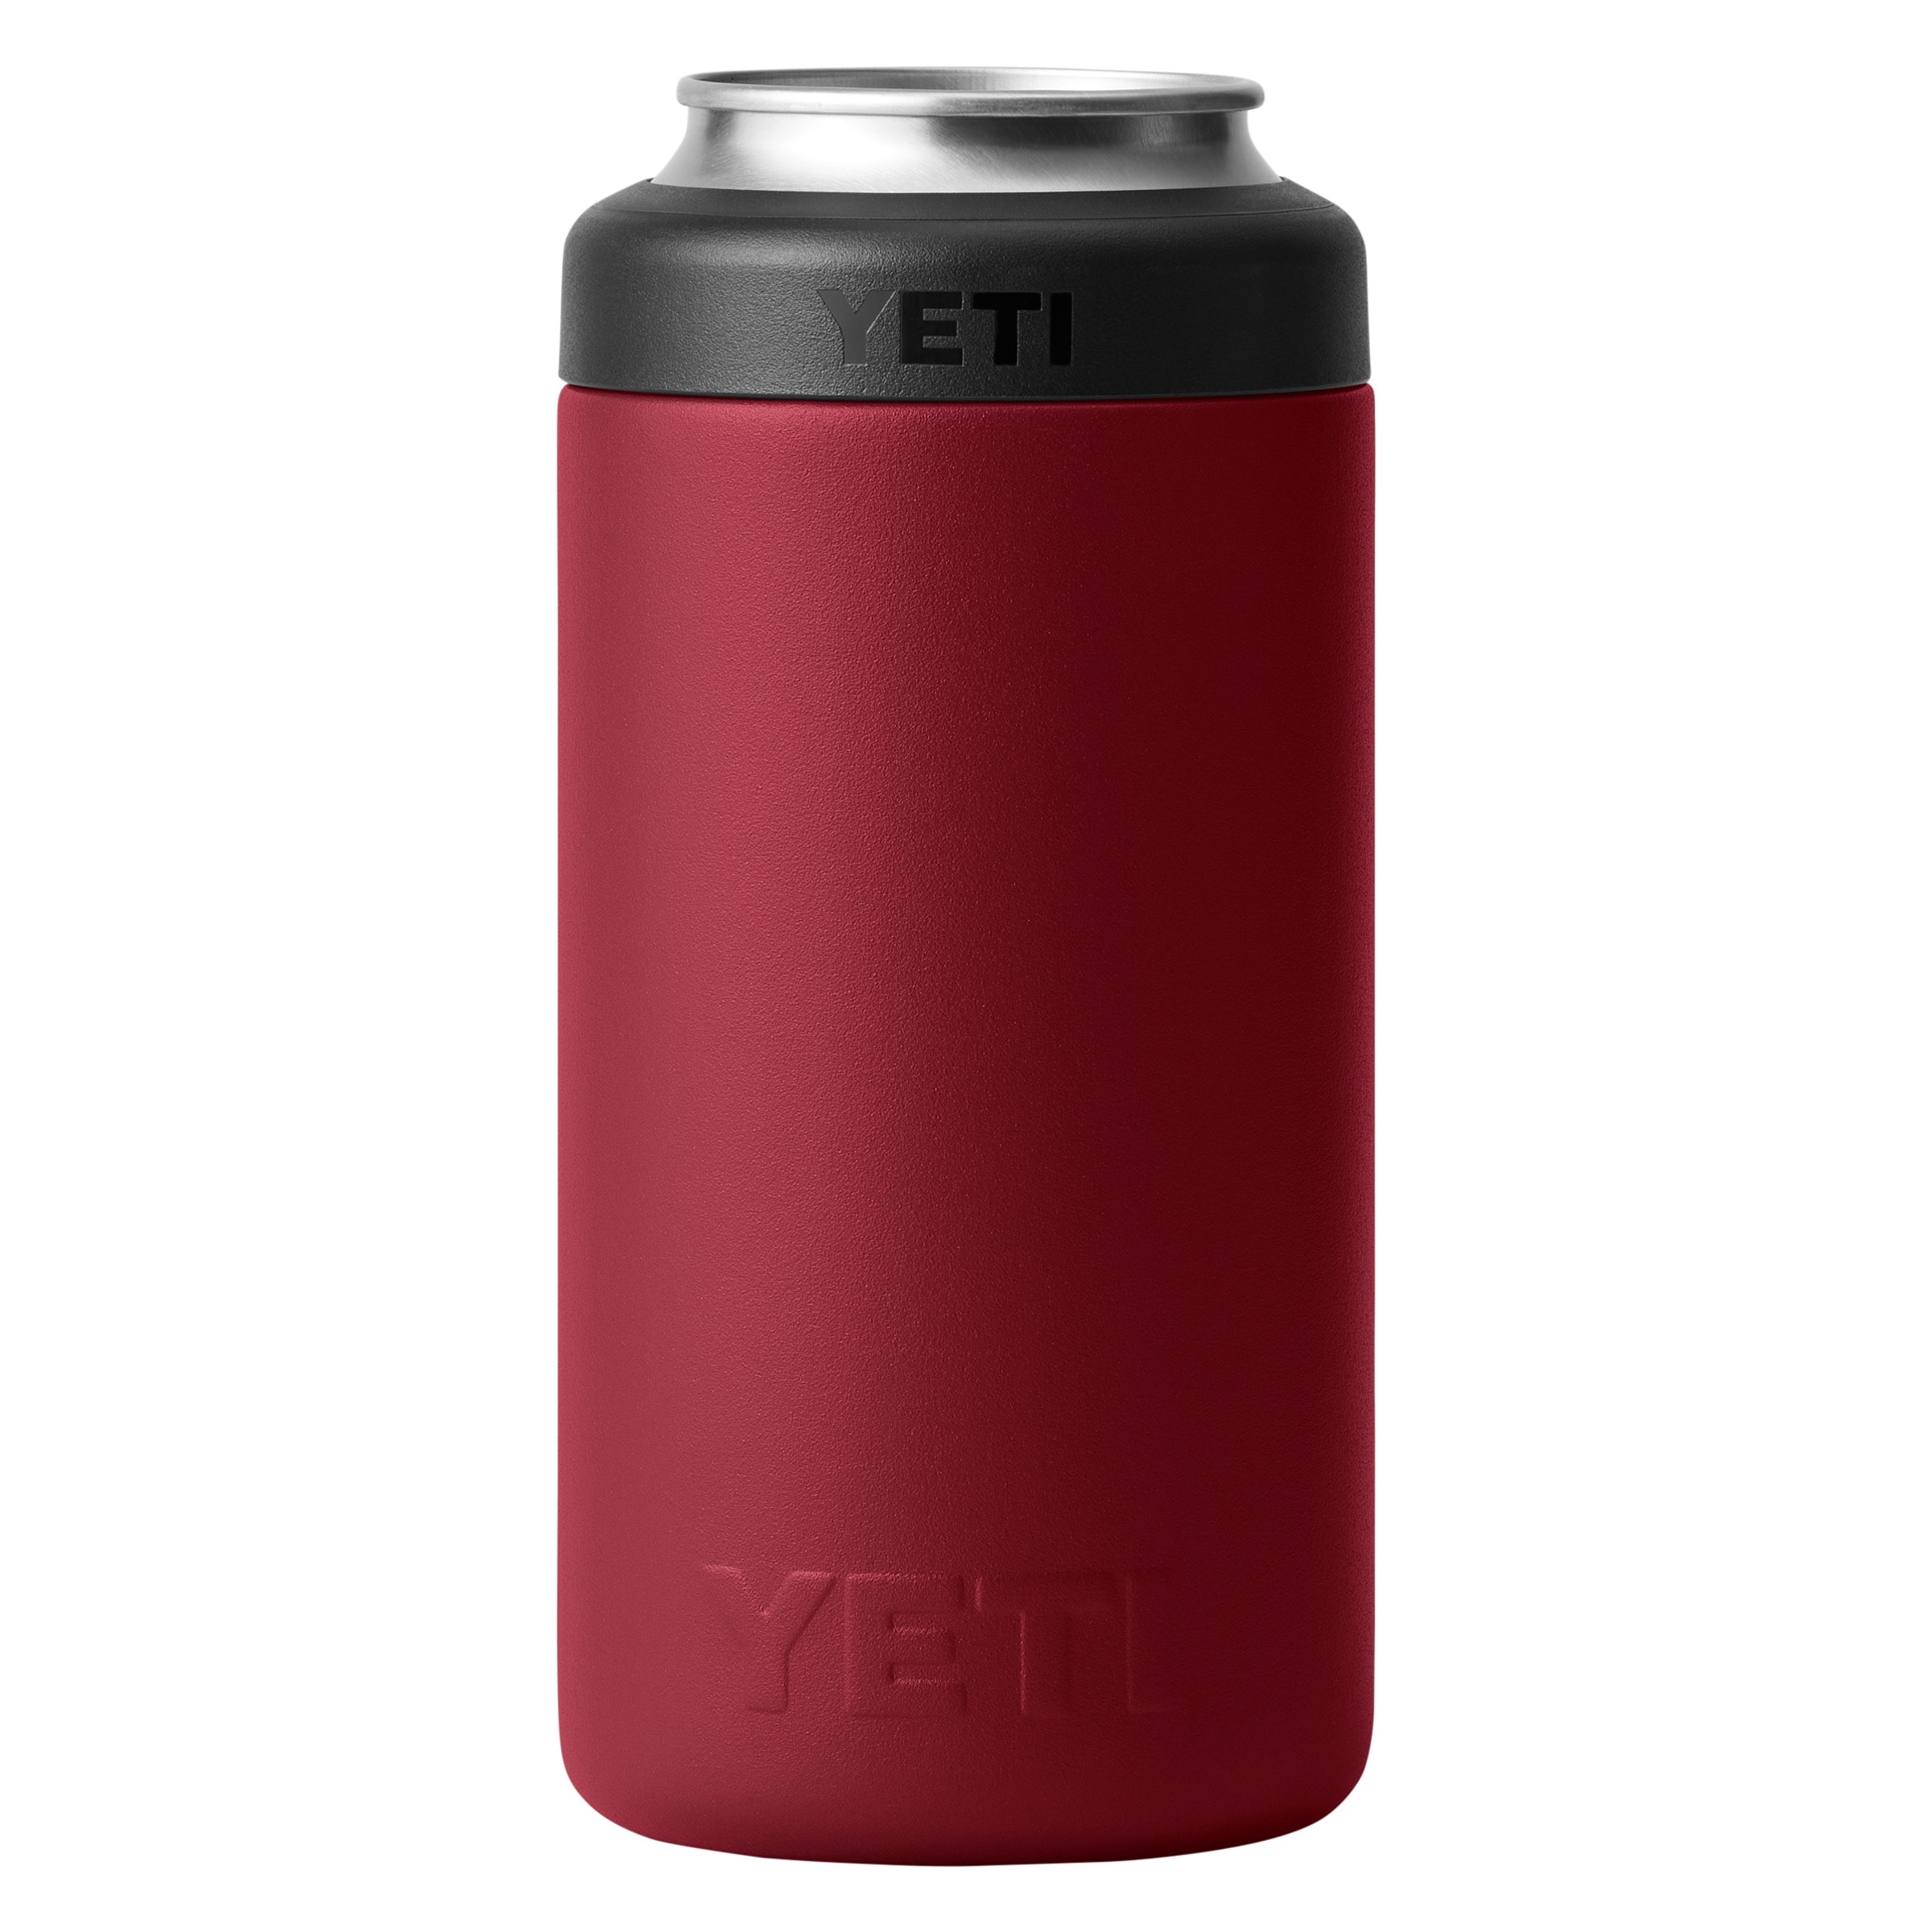 YETI Rambler 16-oz Stainless Steel Colster Tall Can Insulator